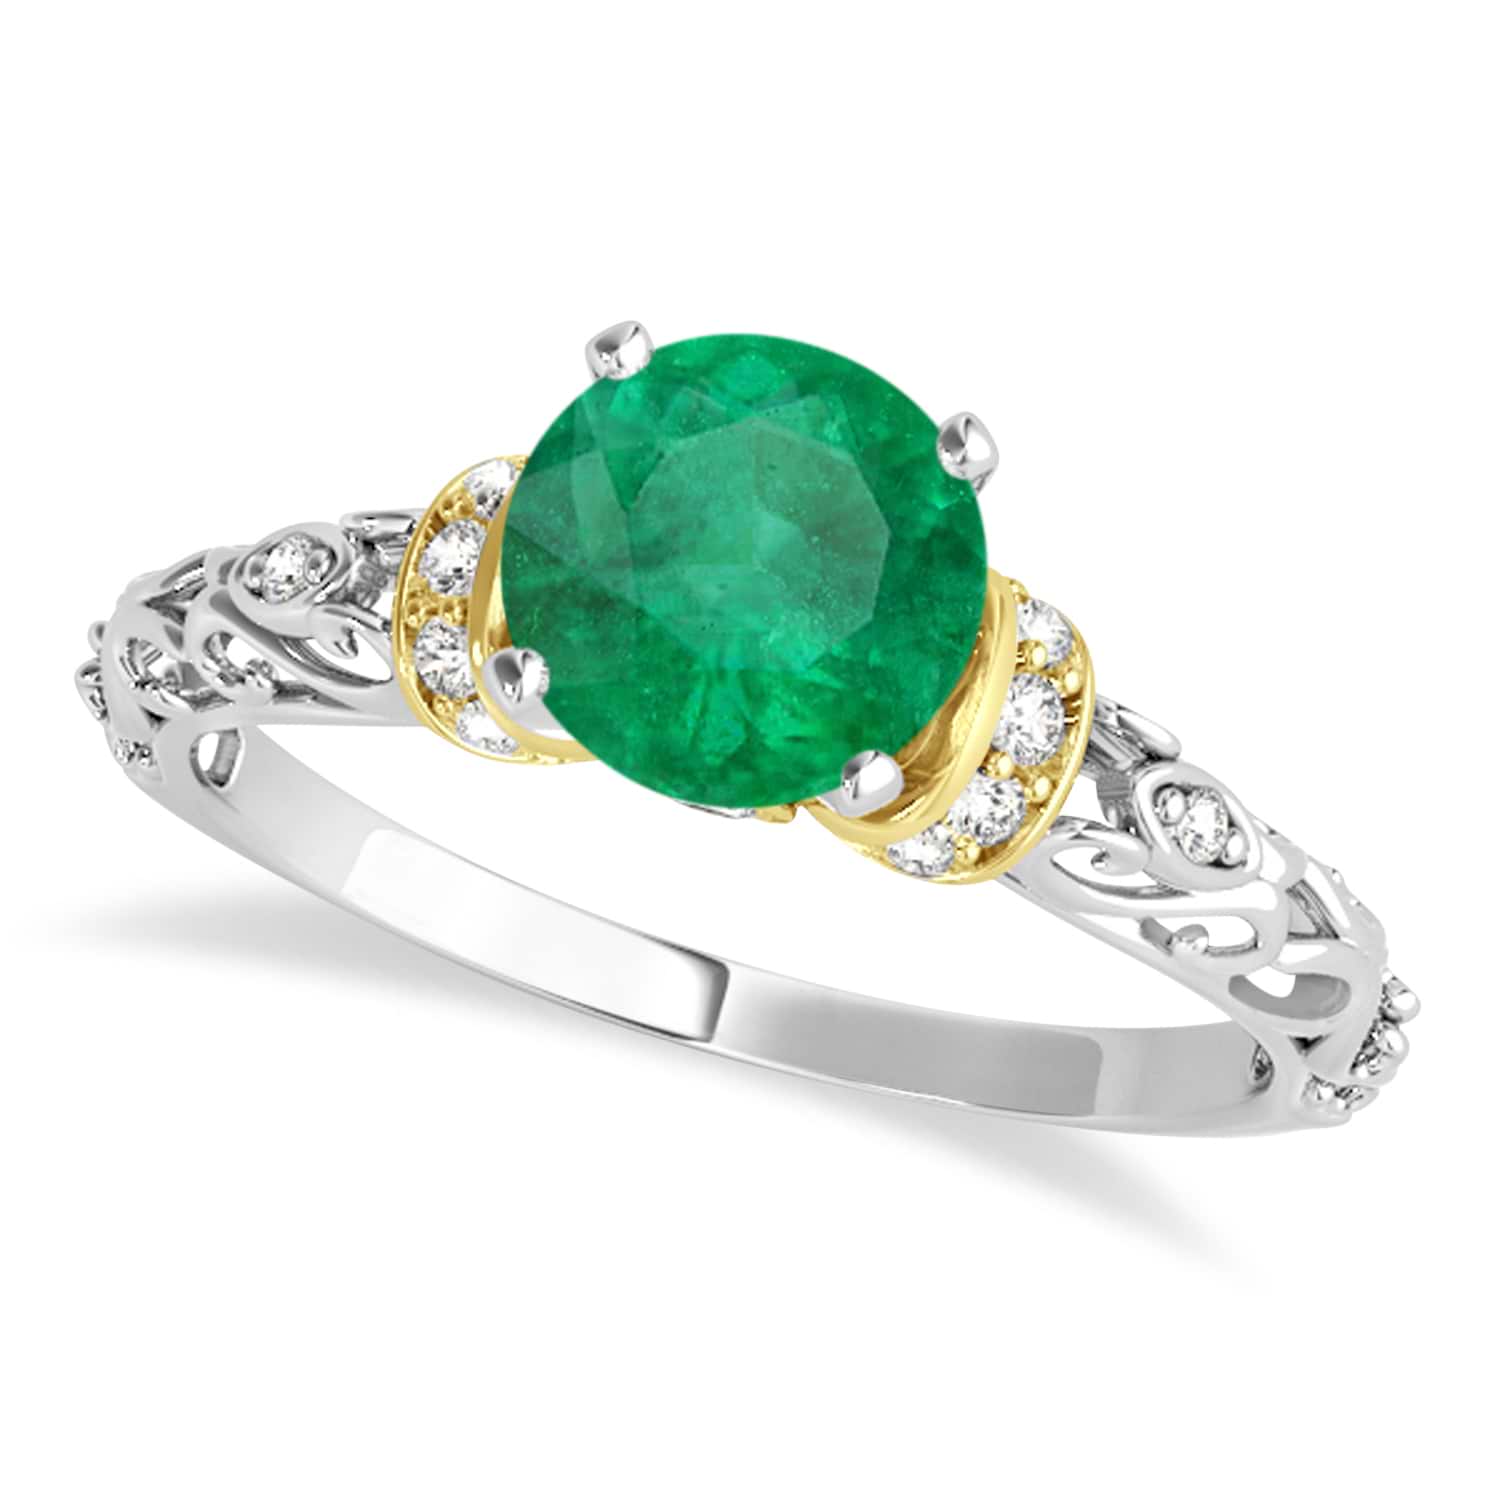 Emerald & Diamond Antique Style Engagement Ring 18k Two-Tone Gold (0.87ct)